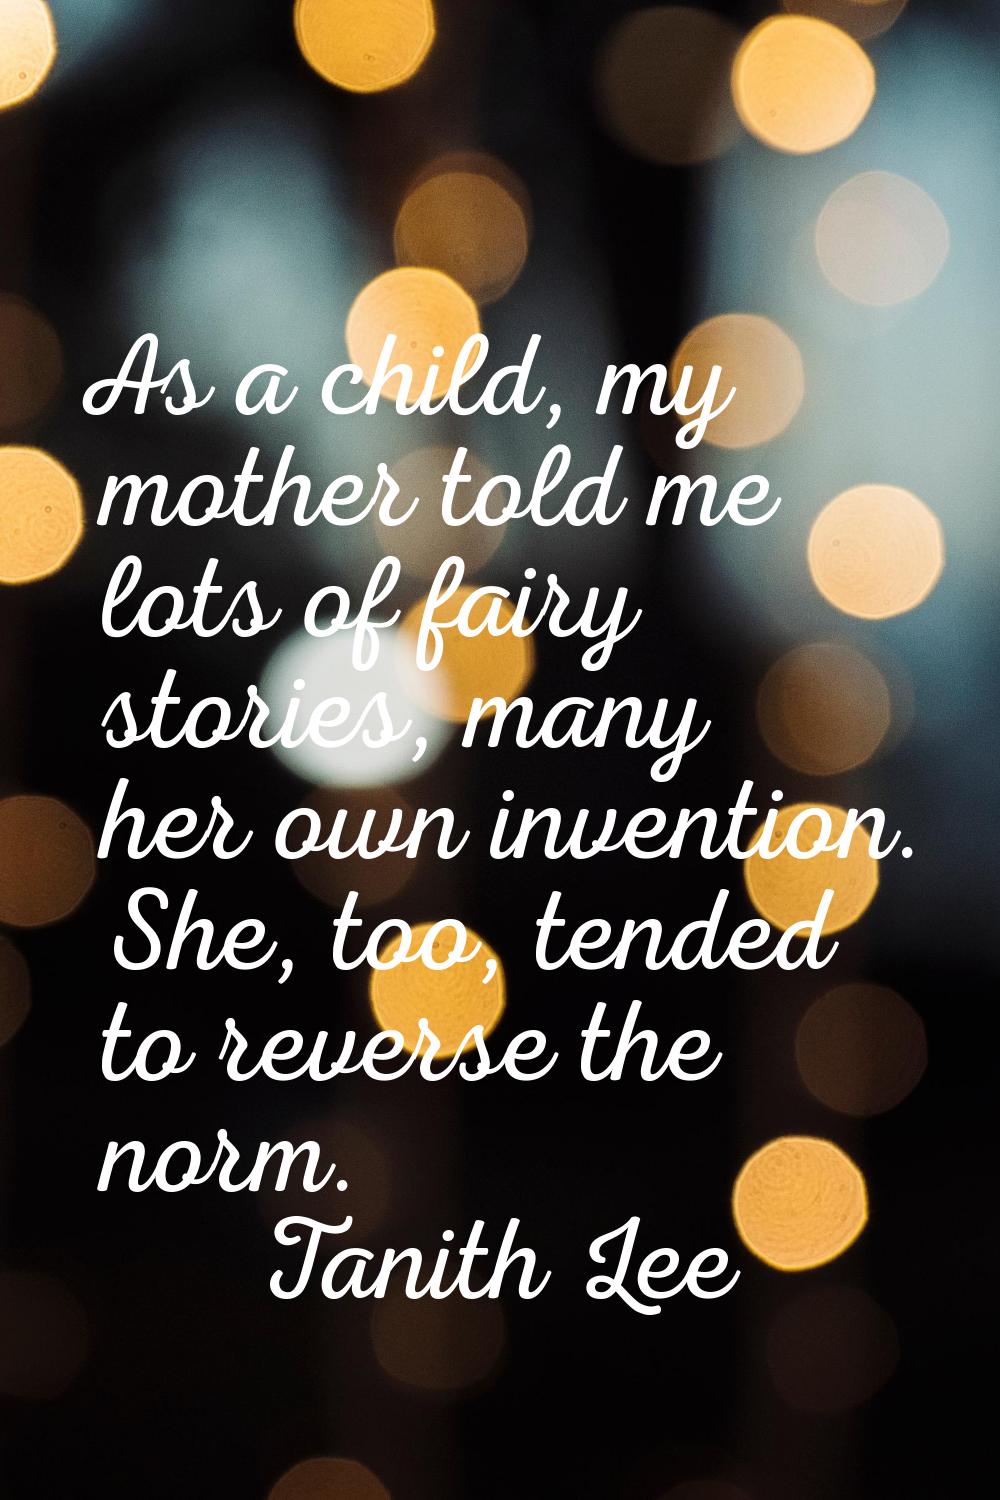 As a child, my mother told me lots of fairy stories, many her own invention. She, too, tended to re